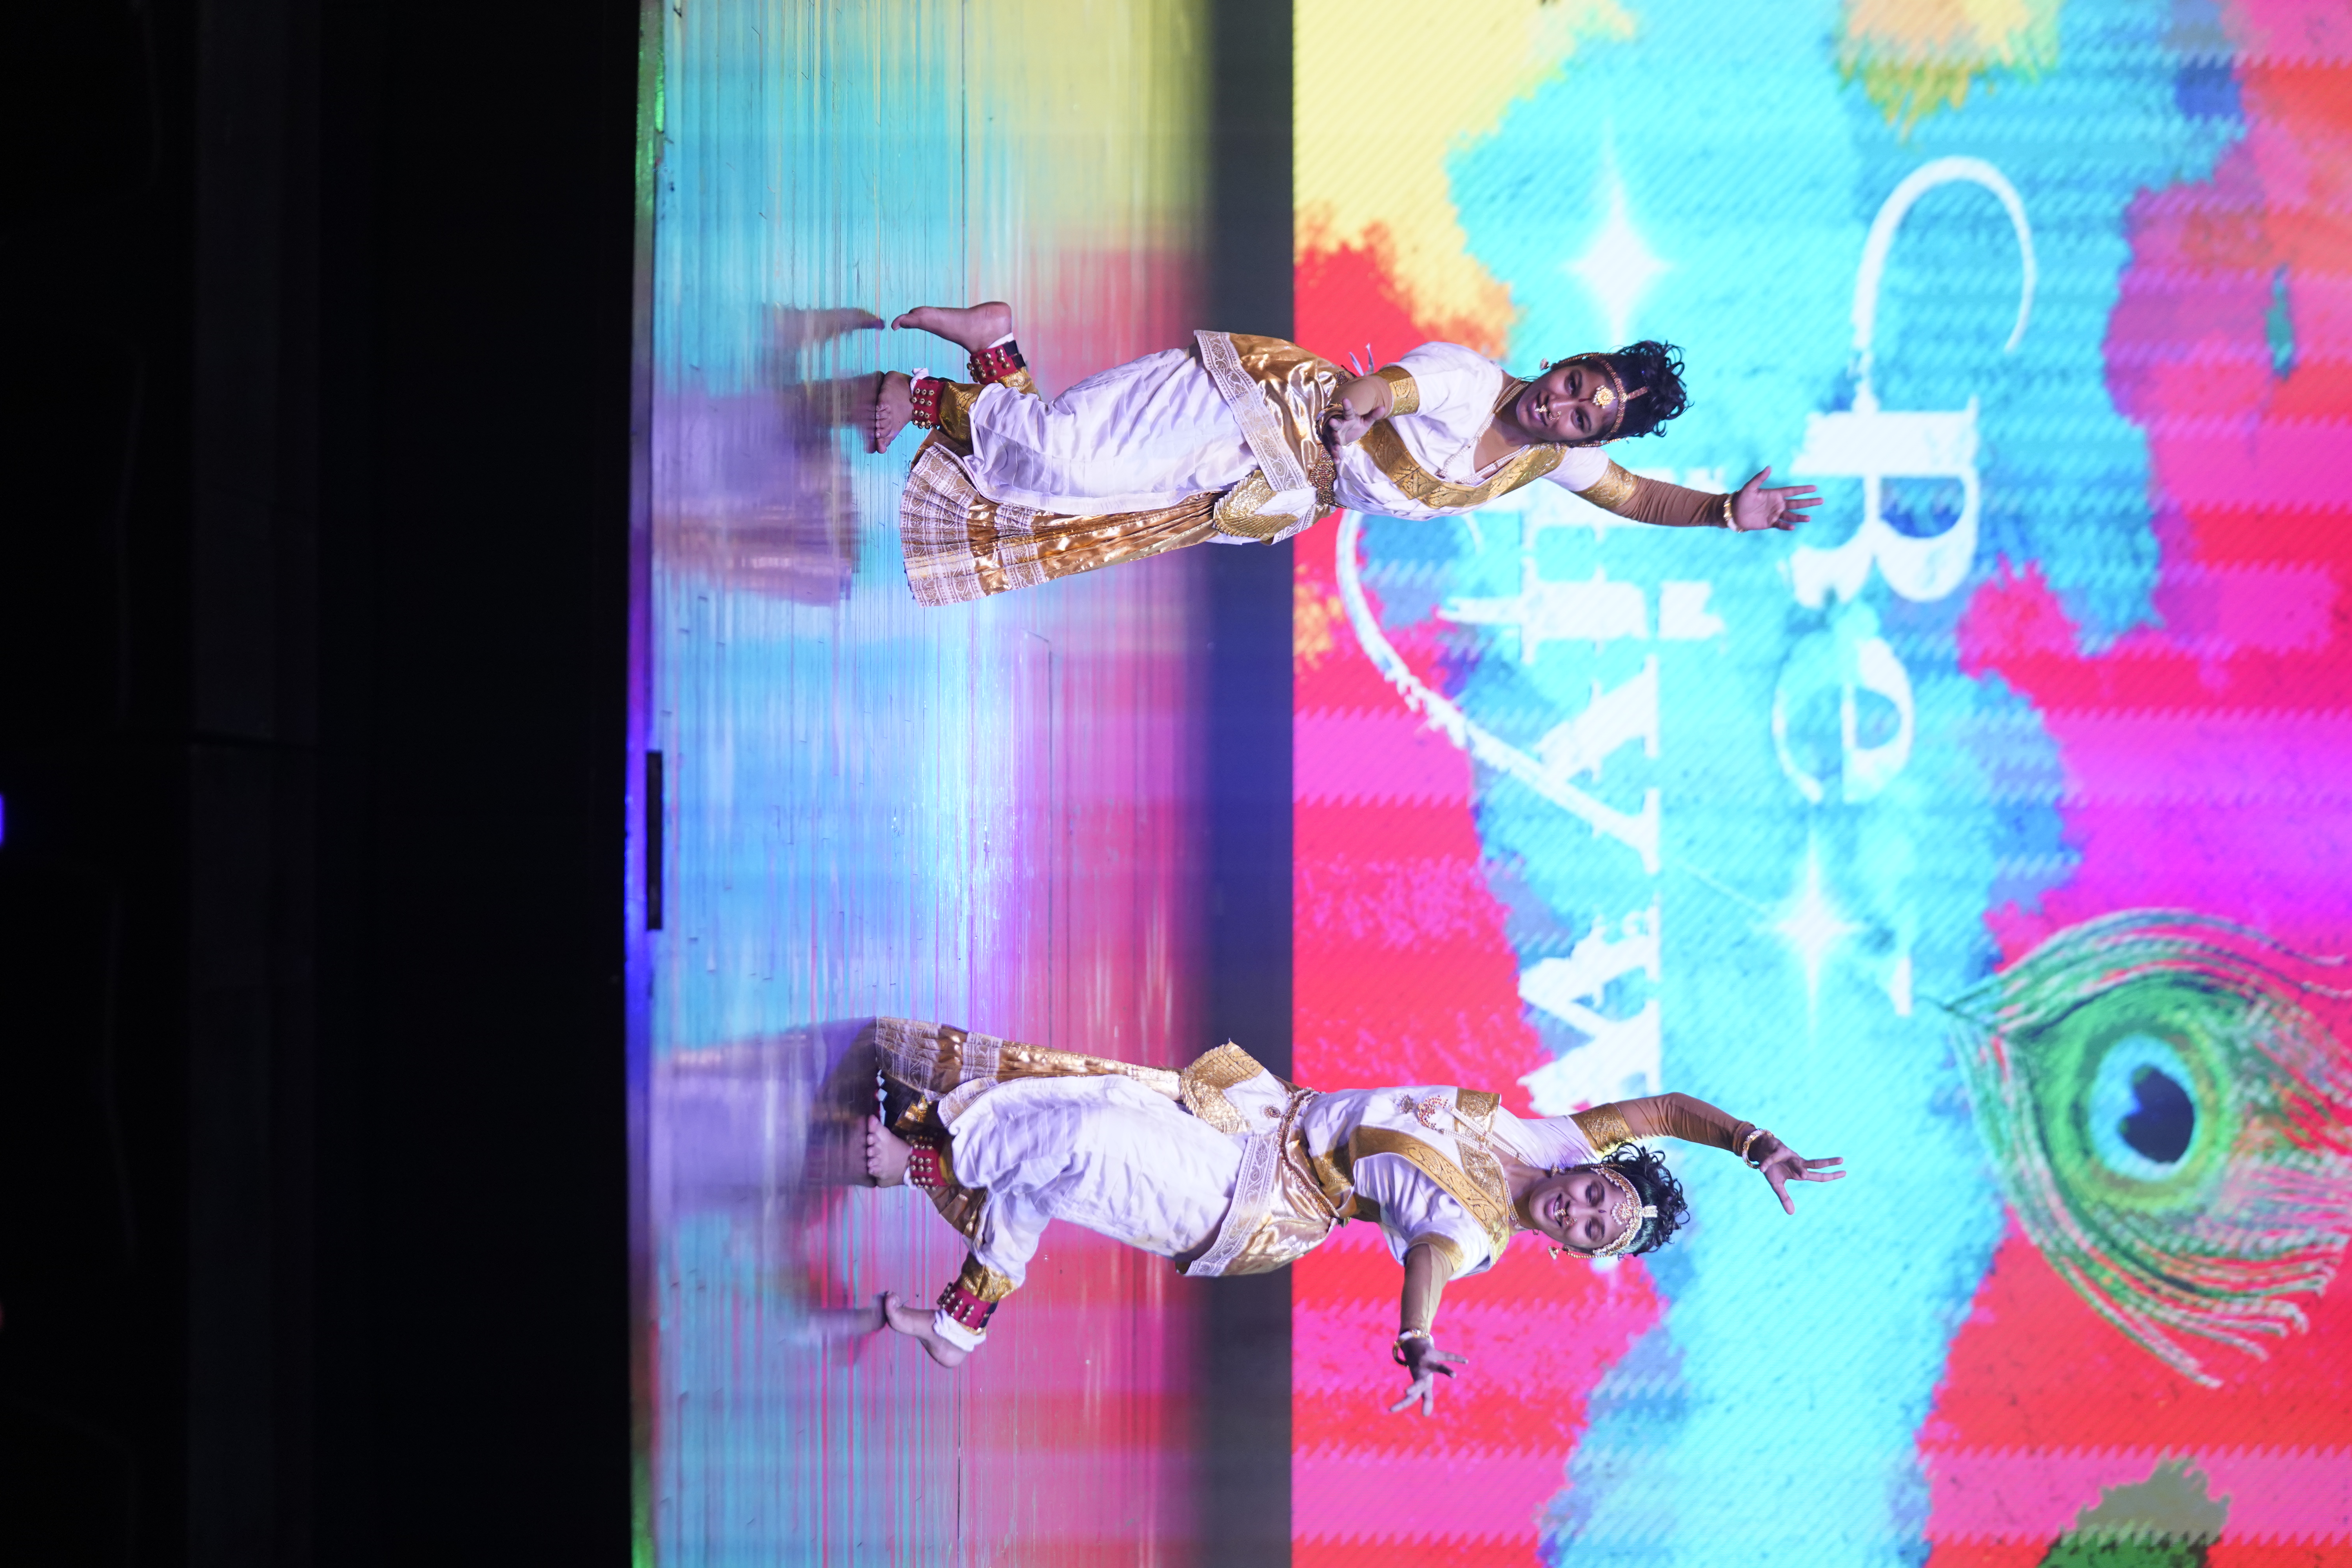 Two Indian dancers in front of a bright pink and blue background